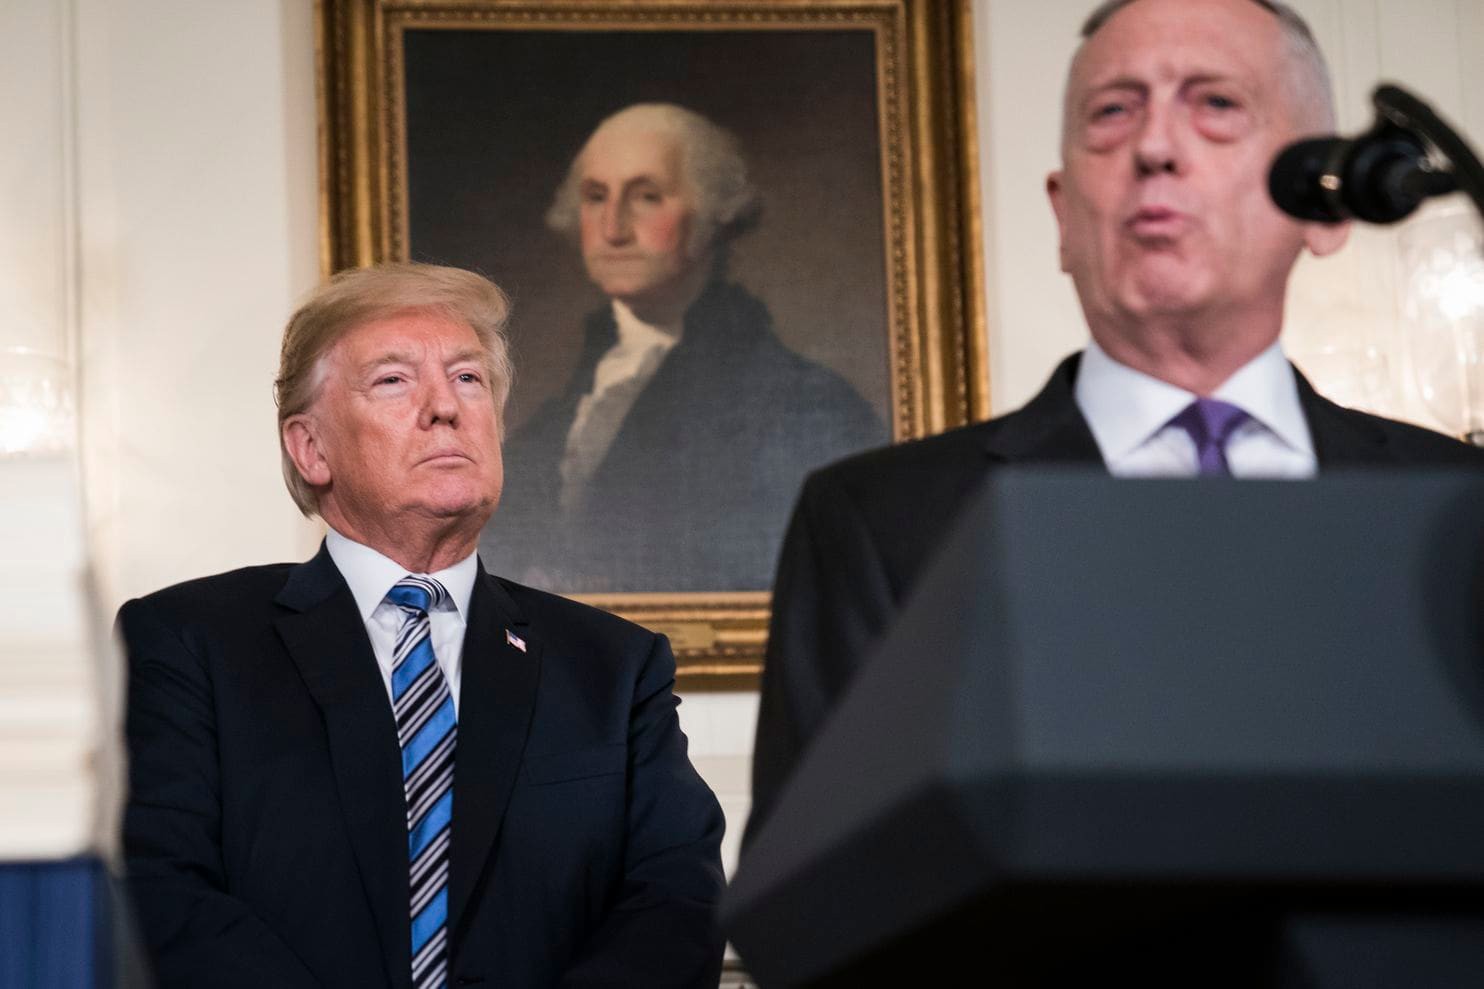 President Donald Trump listens to former defence secretary James Mattis, who quit after the president abruptly announced the withdrawal of troops from Syria. Photo: The Washington Post